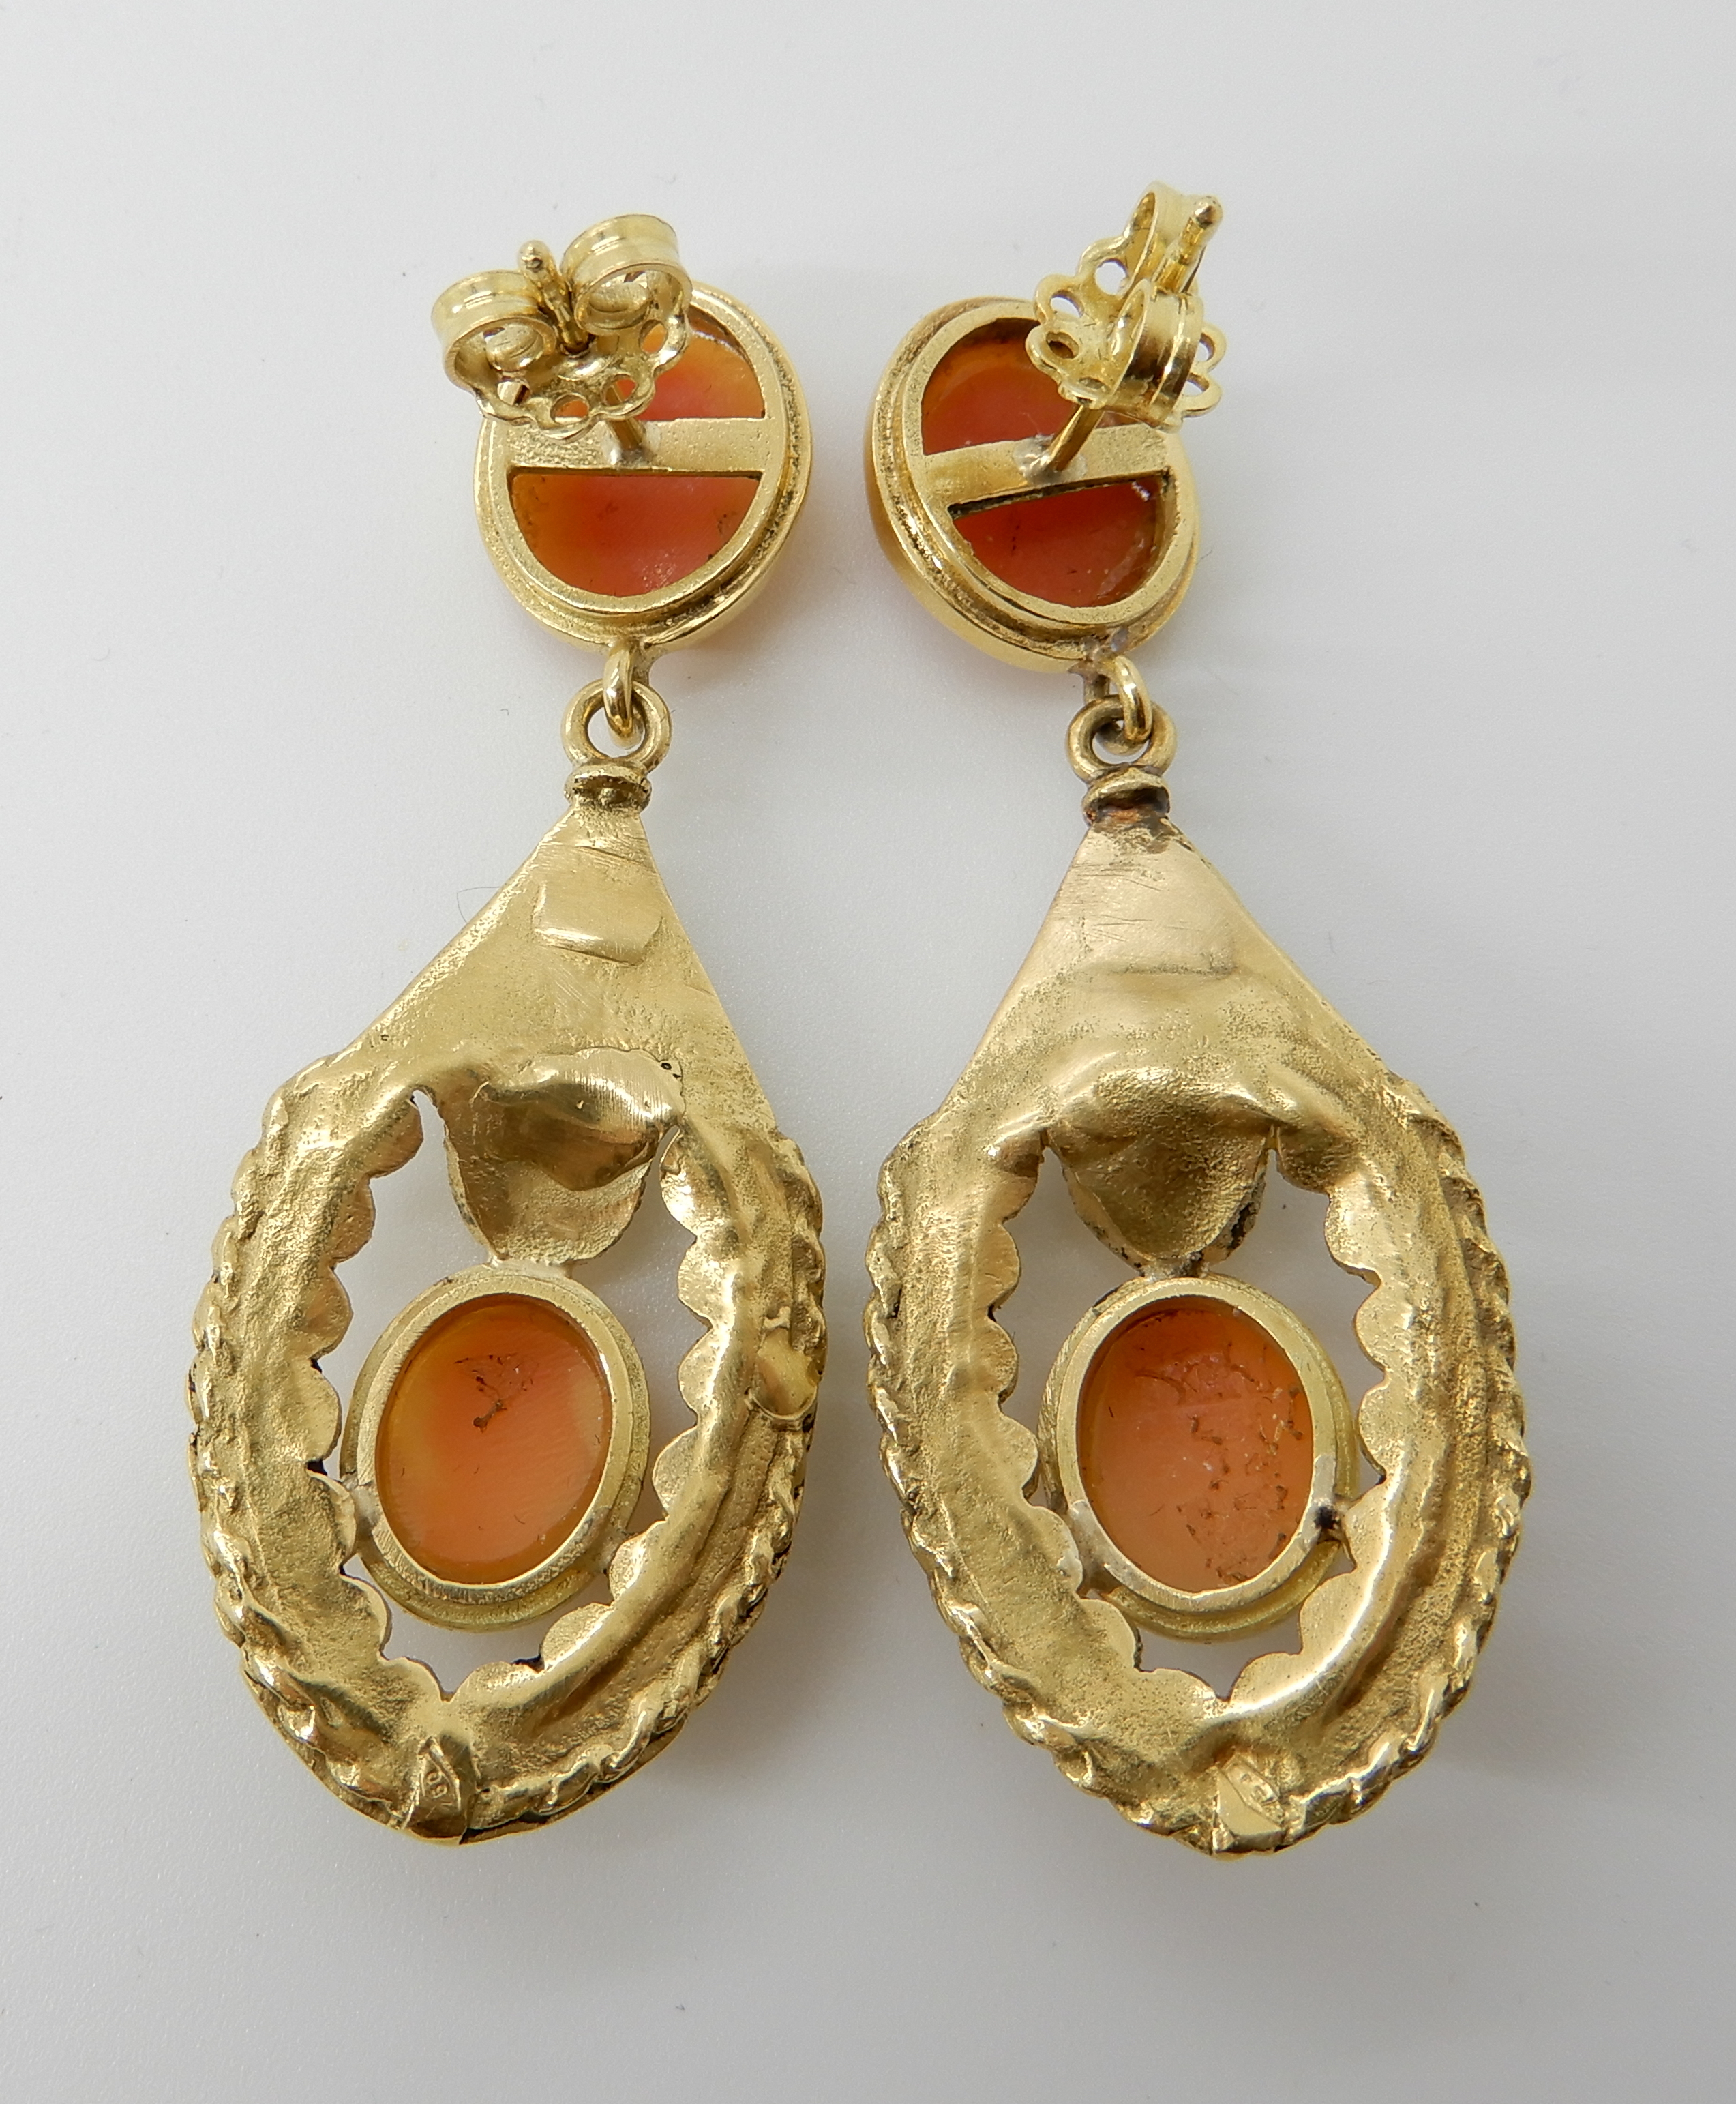 A PAIR OF 18CT GOLD CAMEO EARRINGS with decorative mounts, post and butterfly fitting. Stamped 750 - Image 3 of 4